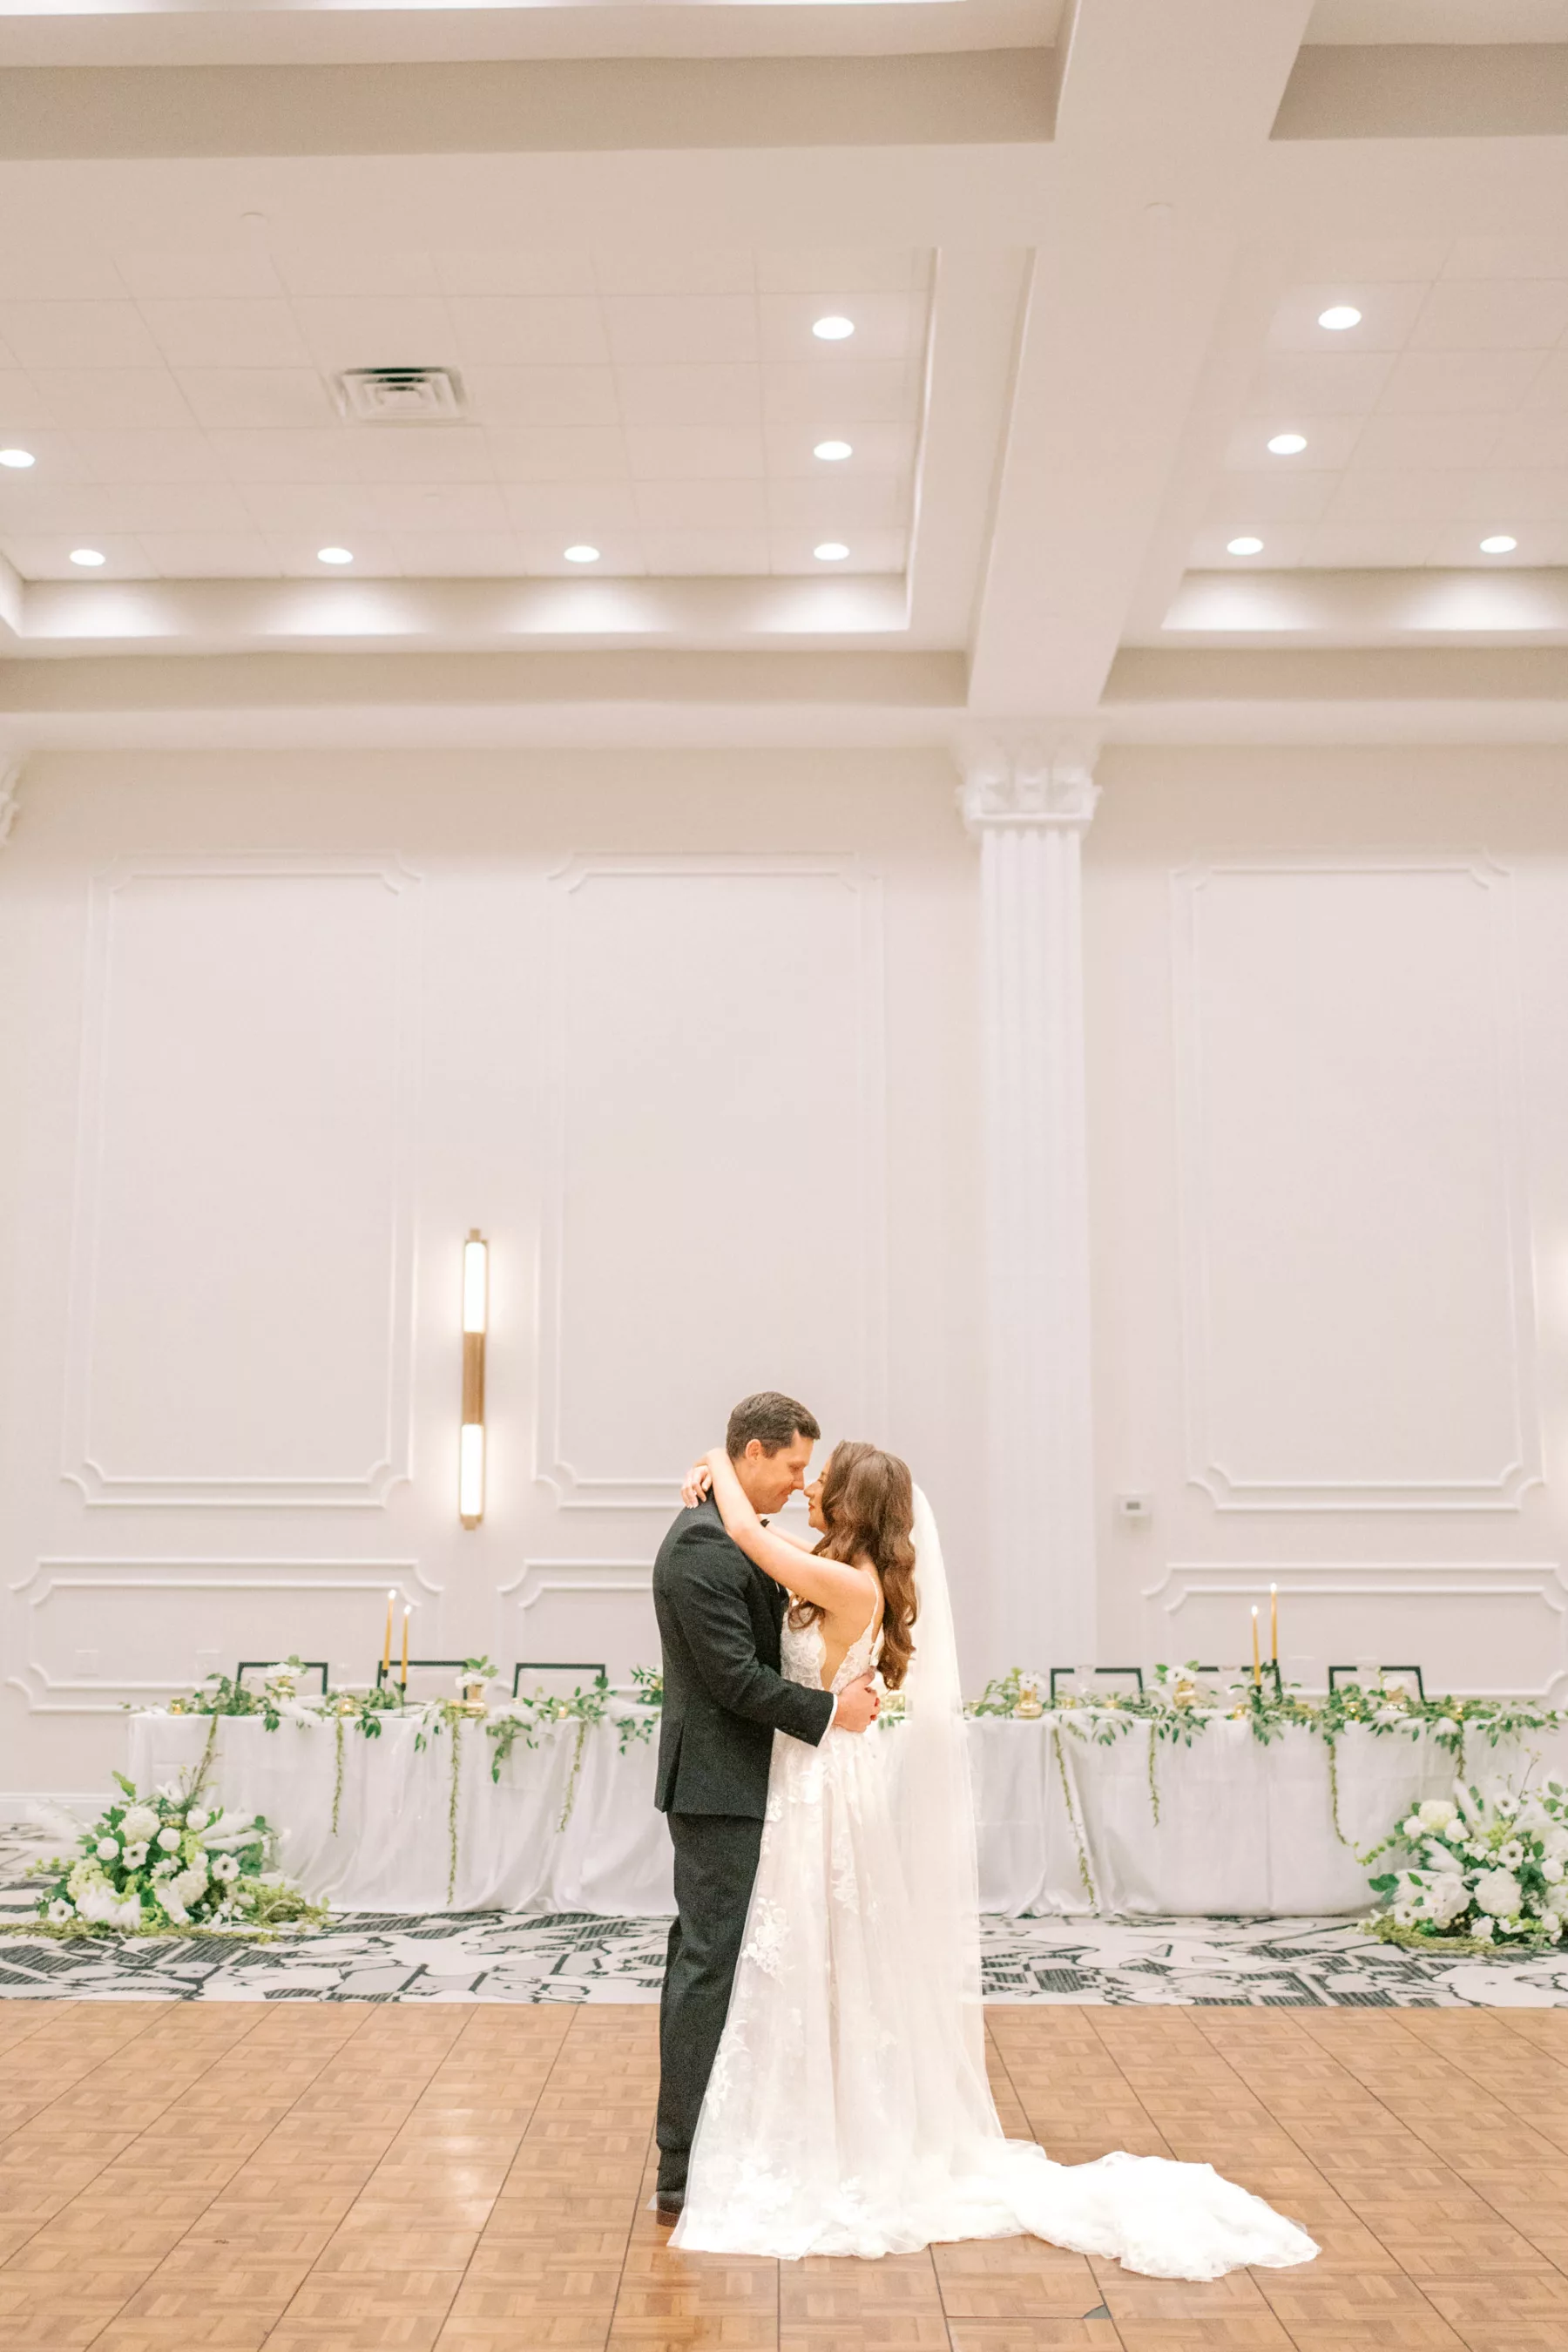 Intimate Bride and Groom Last Dance Wedding Portrait | Tampa Bay Photographer Eddy Almaguer Photography | Event Venue Hotel Flor | Videographer Priceless Studio Design | Planner Coastal Coordinating | Content Creator Behind The Vows